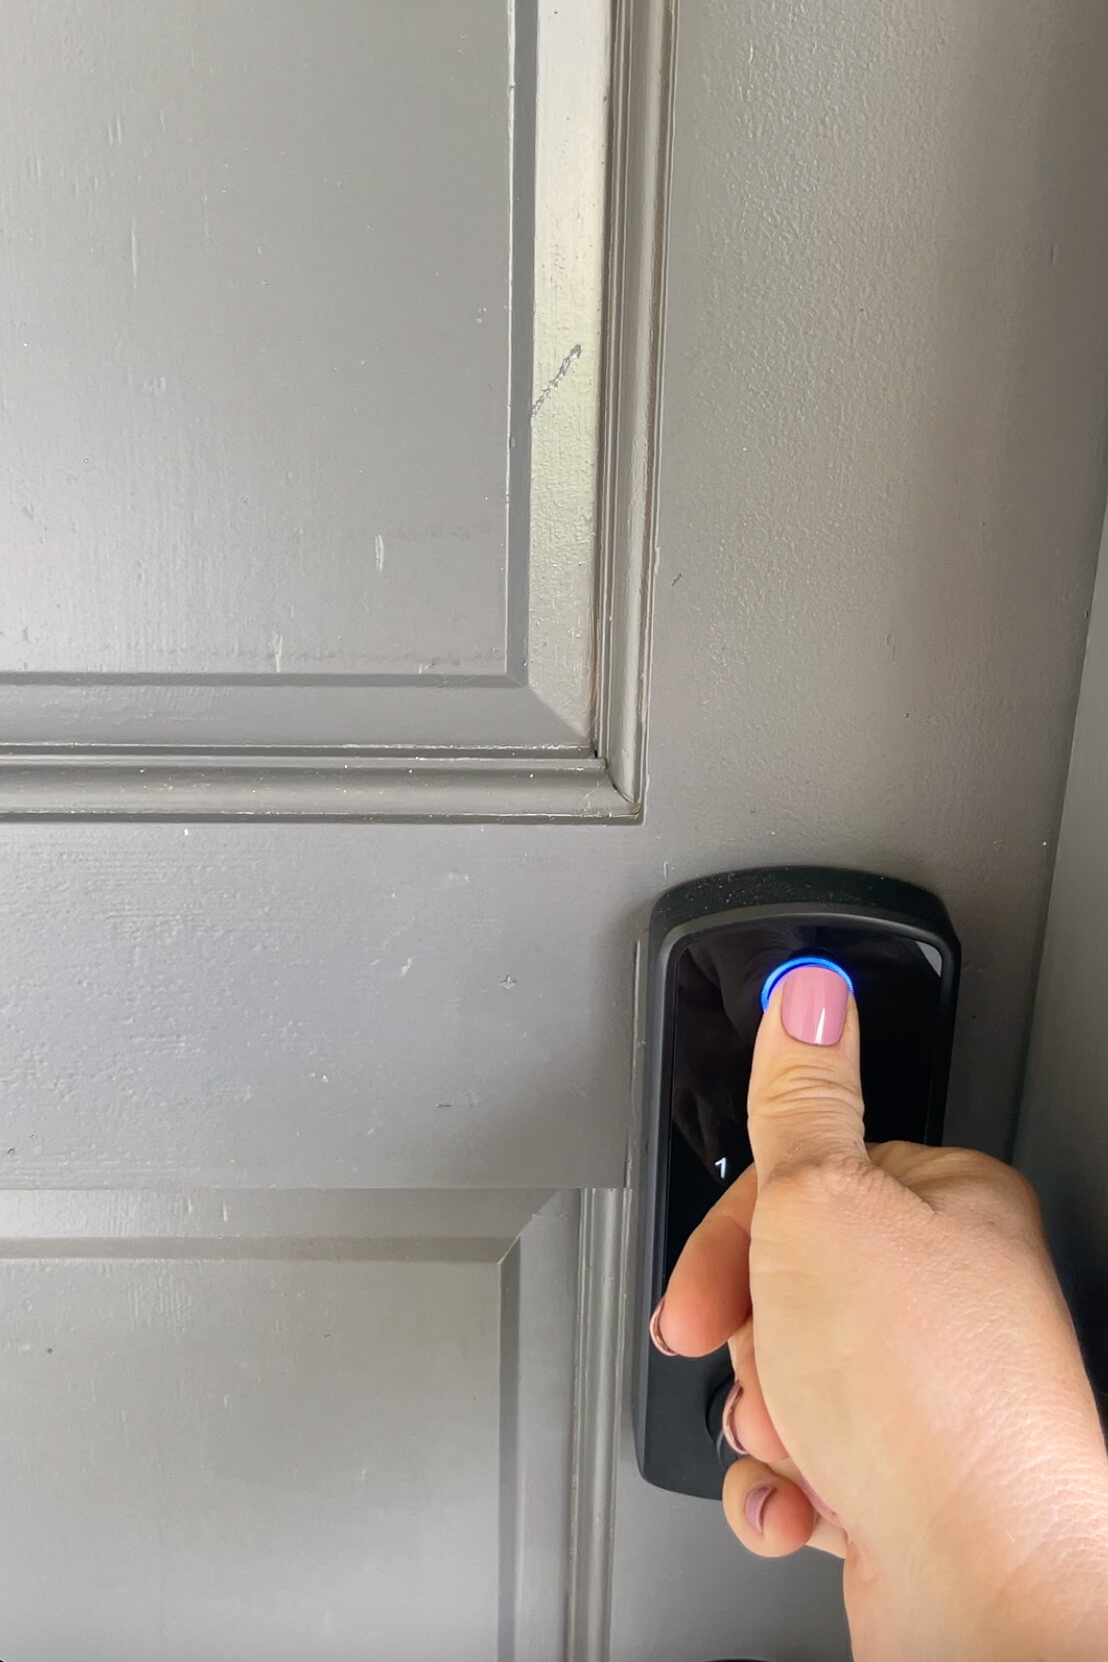 New electronic, keyless lock installed on a freshly painted door.